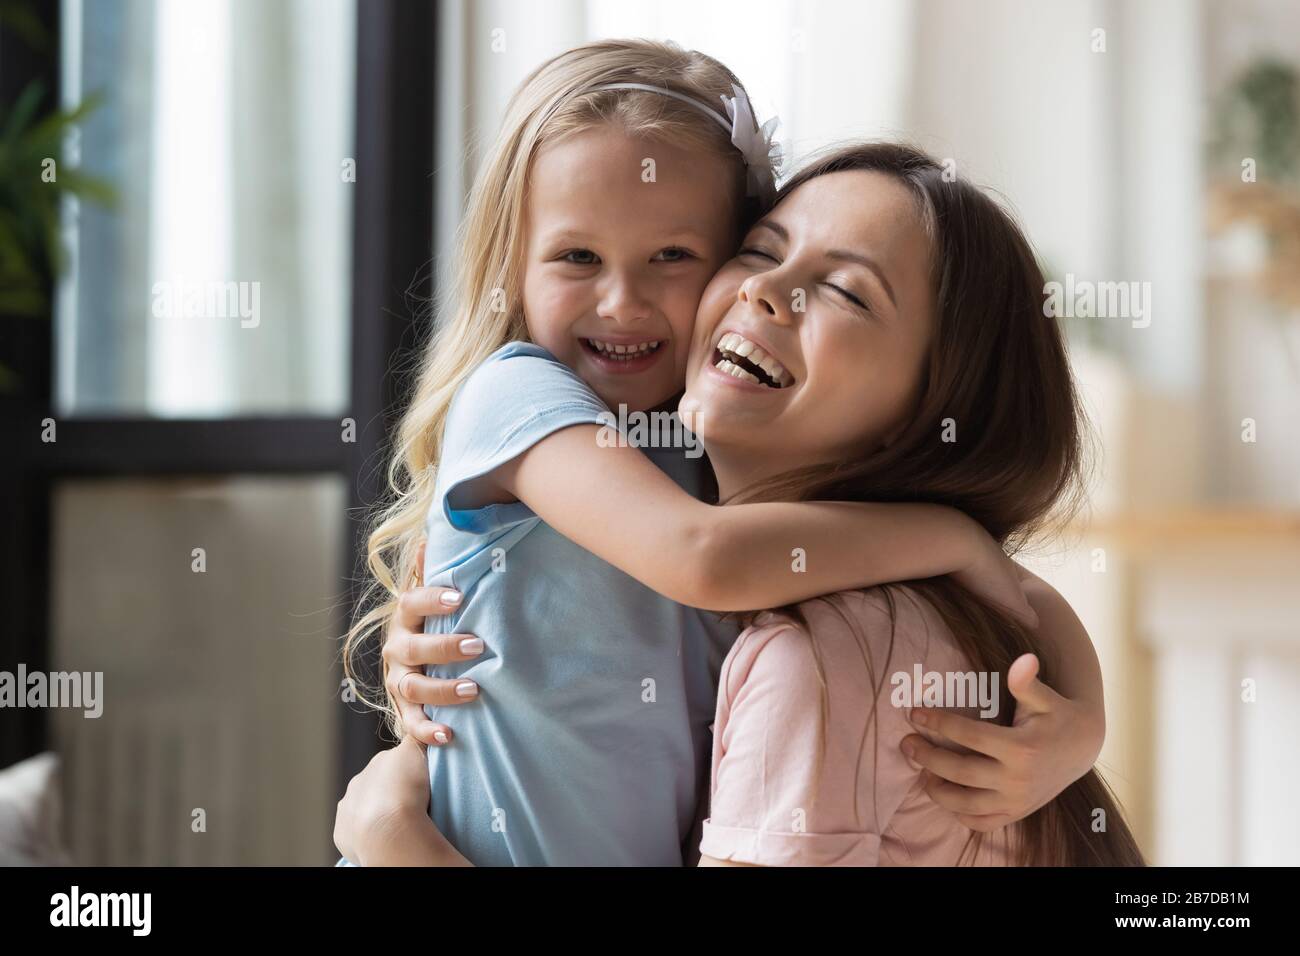 Overjoyed mom and little daughter cuddle showing love Stock Photo